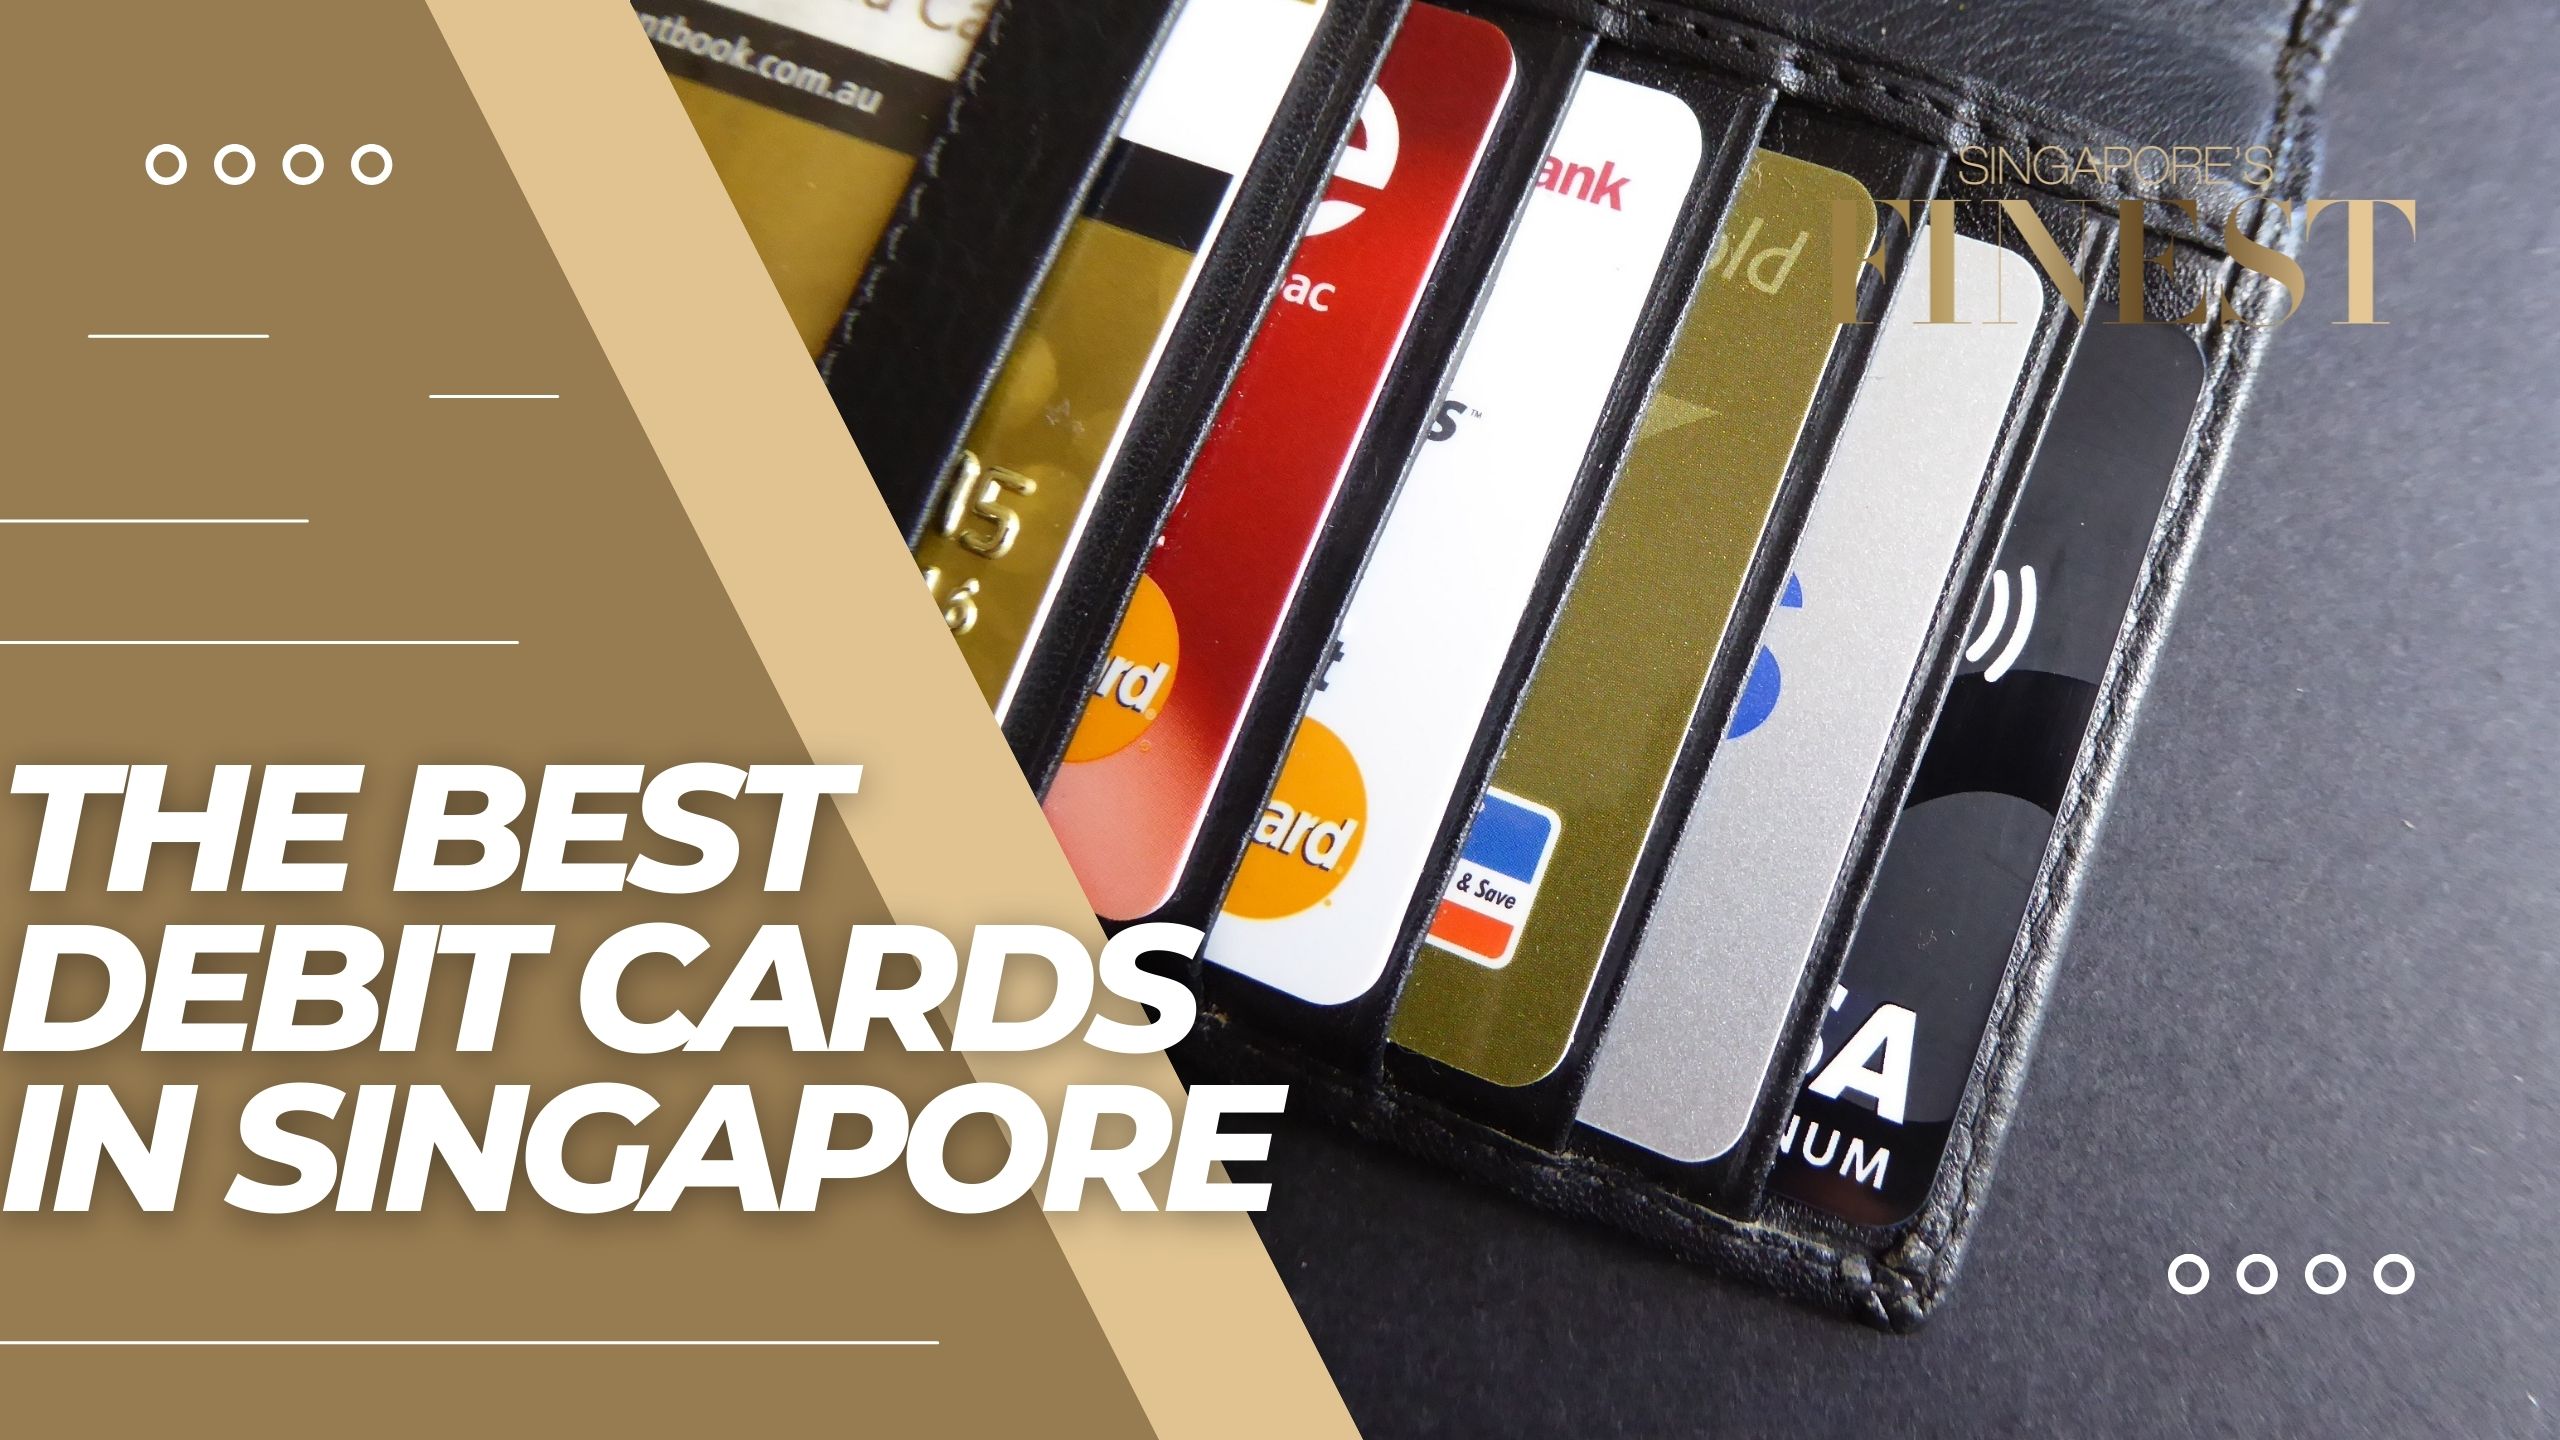 The Finest Debit Cards in Singapore